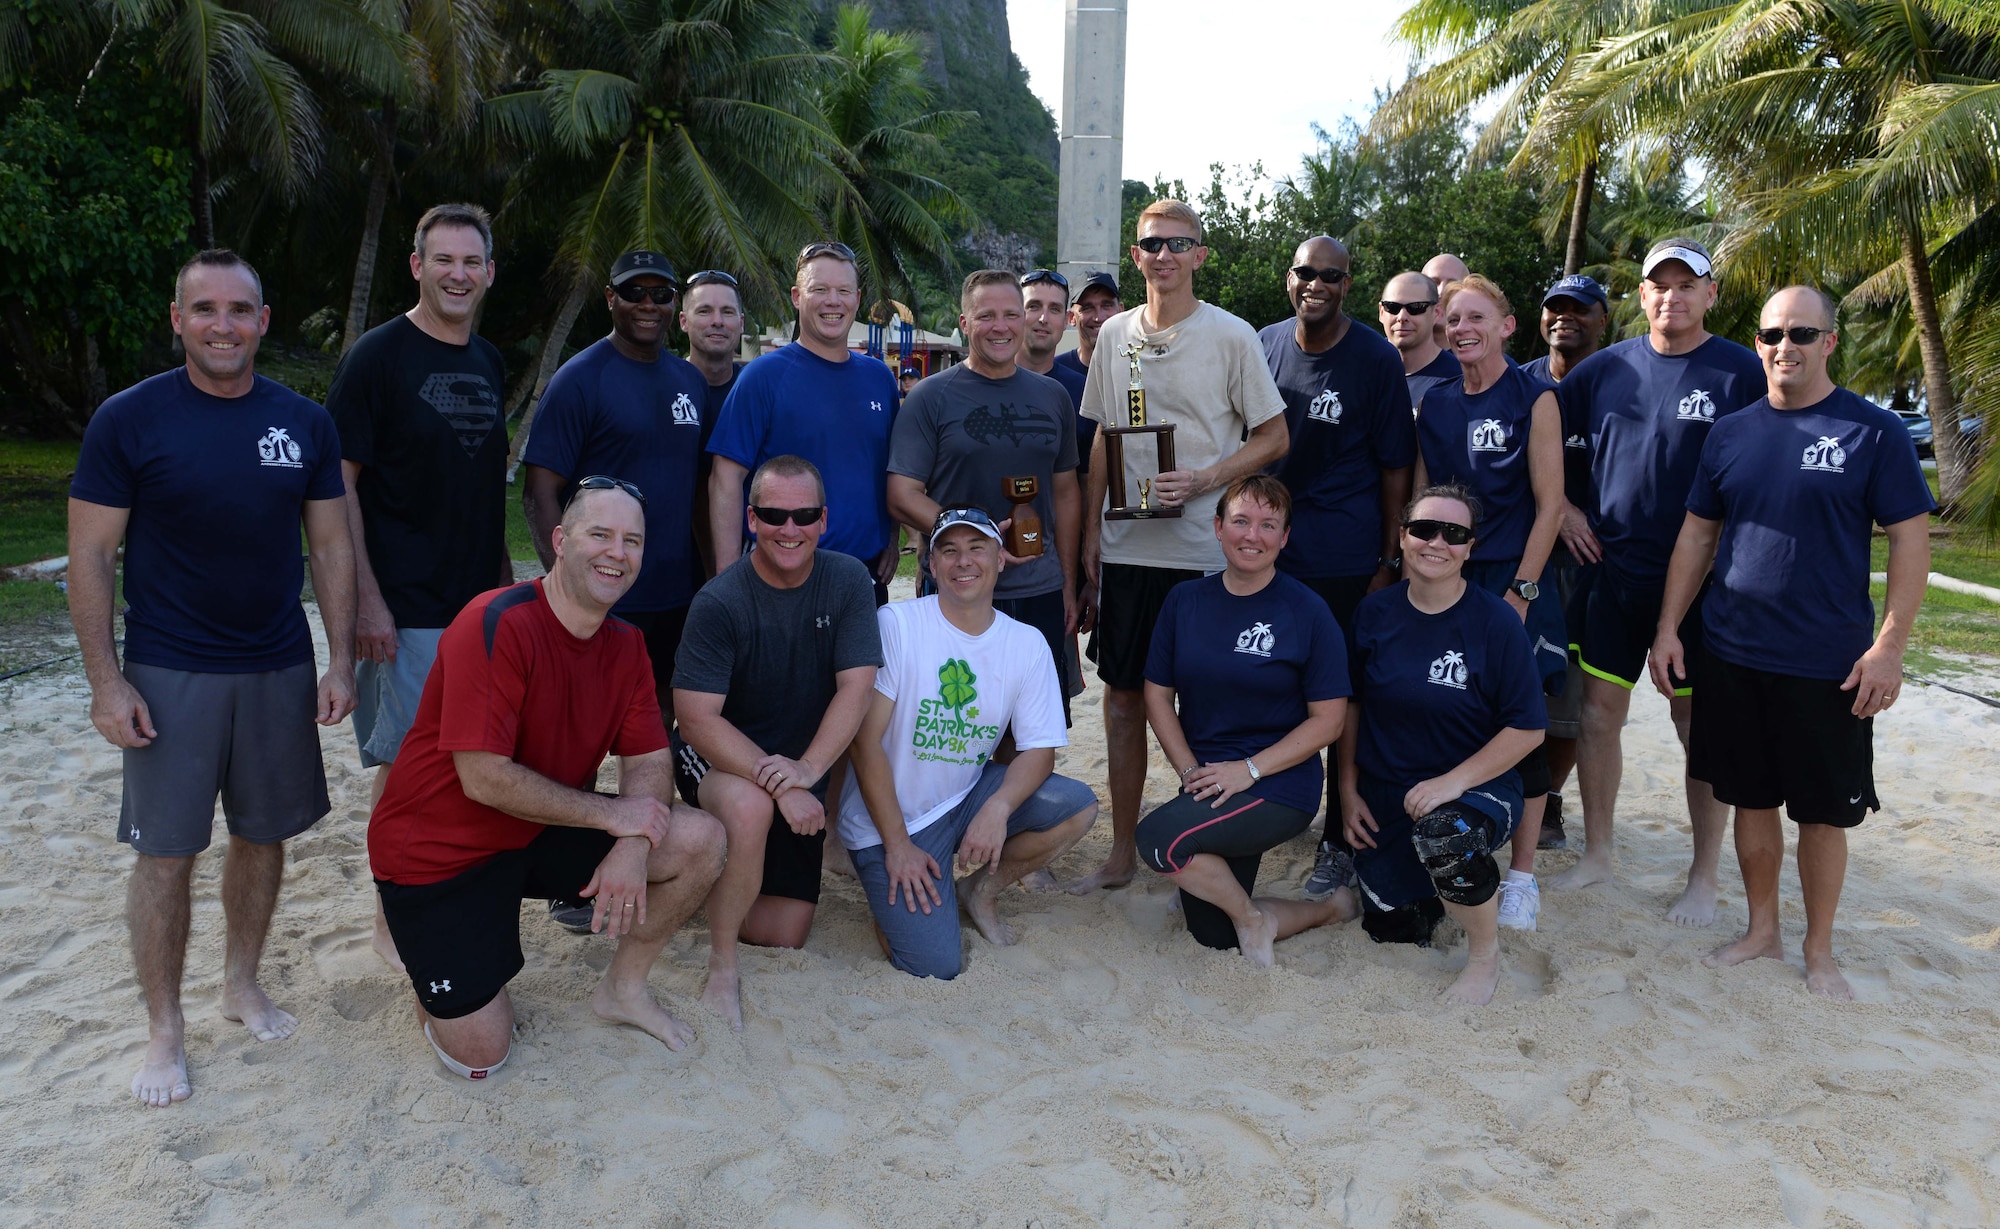 Team Andersen chief master sgts. and colonels gather together for a picture after the Chiefs vs. Eagles volleyball game Oct. 3, 2014, on Andersen Air Force Base, Guam. The Eagles beat the Chiefs in a  best two out of three tournament style volleyball game and secured possession of the trophy until the next event.  (U.S. Air Force photo by Senior Airman Katrina M. Brisbin/Released)